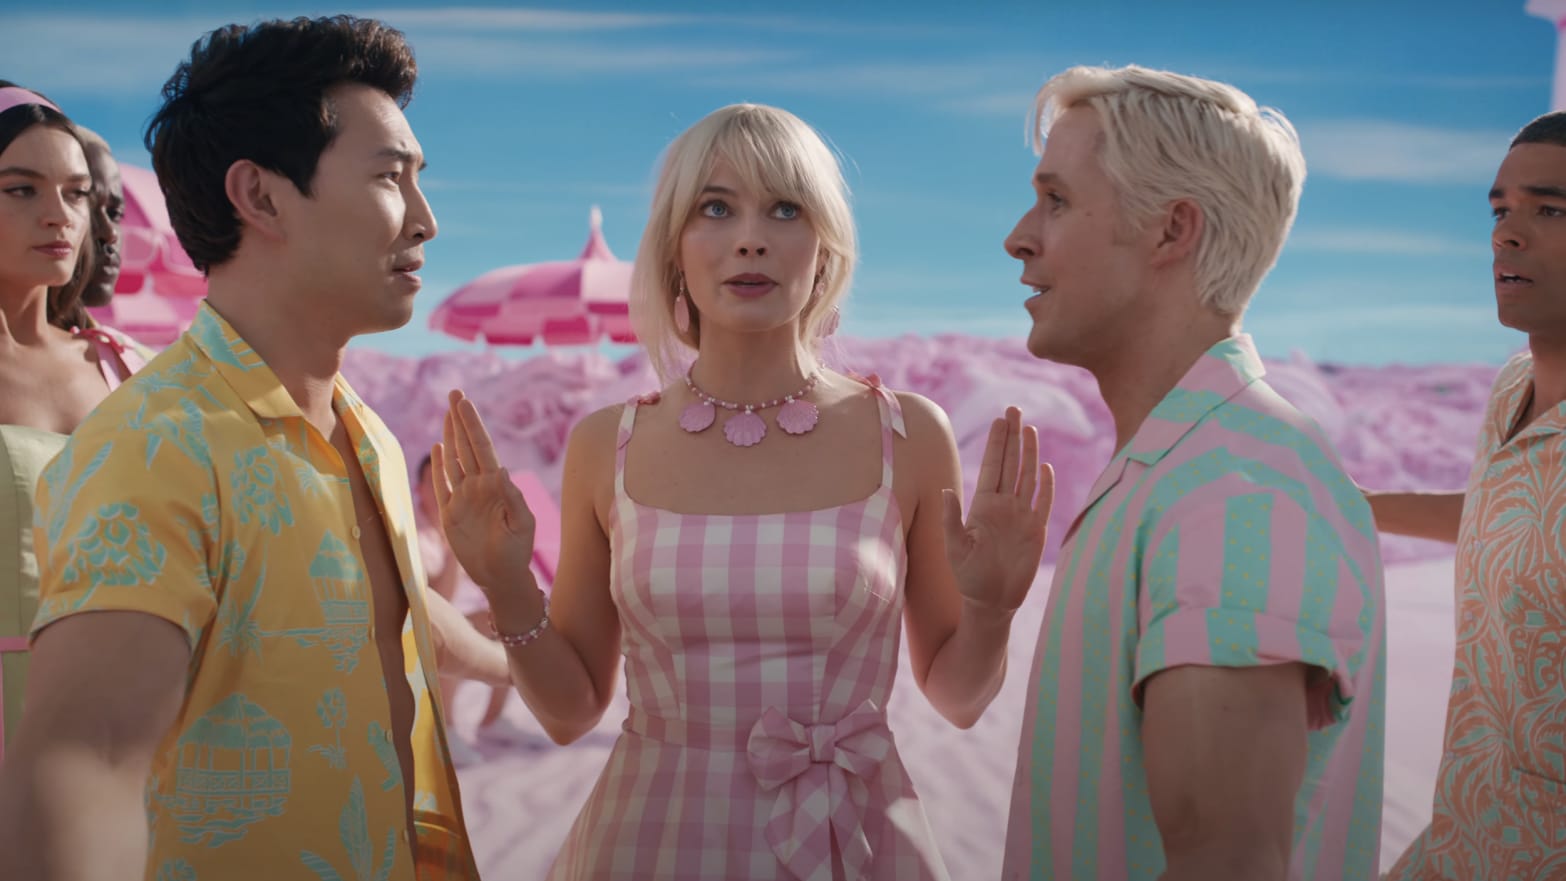 Barbie Movie Trailer Is Visually Striking And Millions Are Hooked The ...